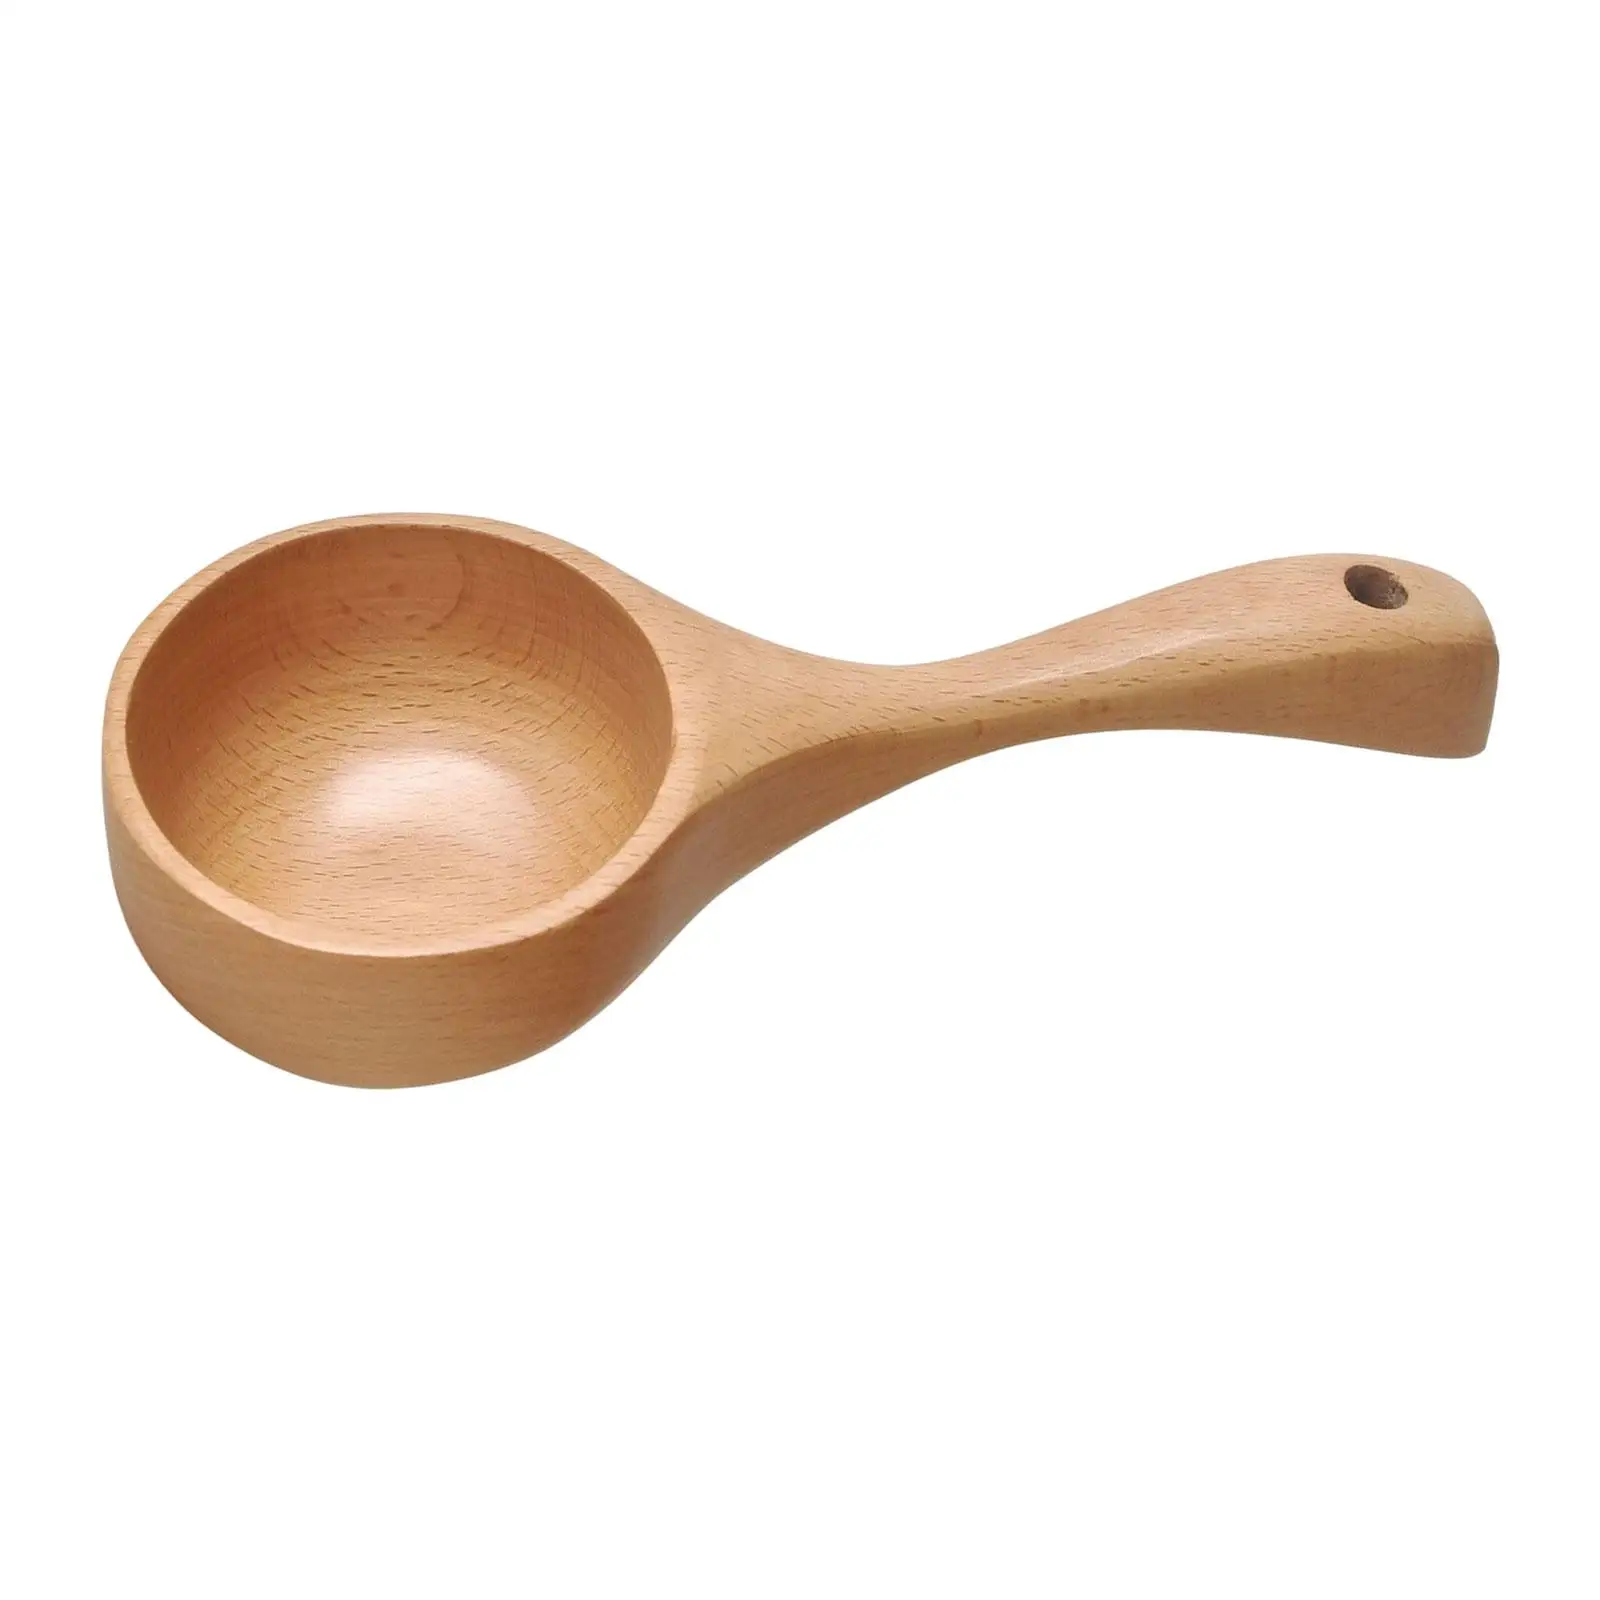 Serving Soup Tablespoon Handmade Kitchen Utensil Tableware Wooden Ladle Spoon Water Spoon for Canisters Flour Rice Porridge